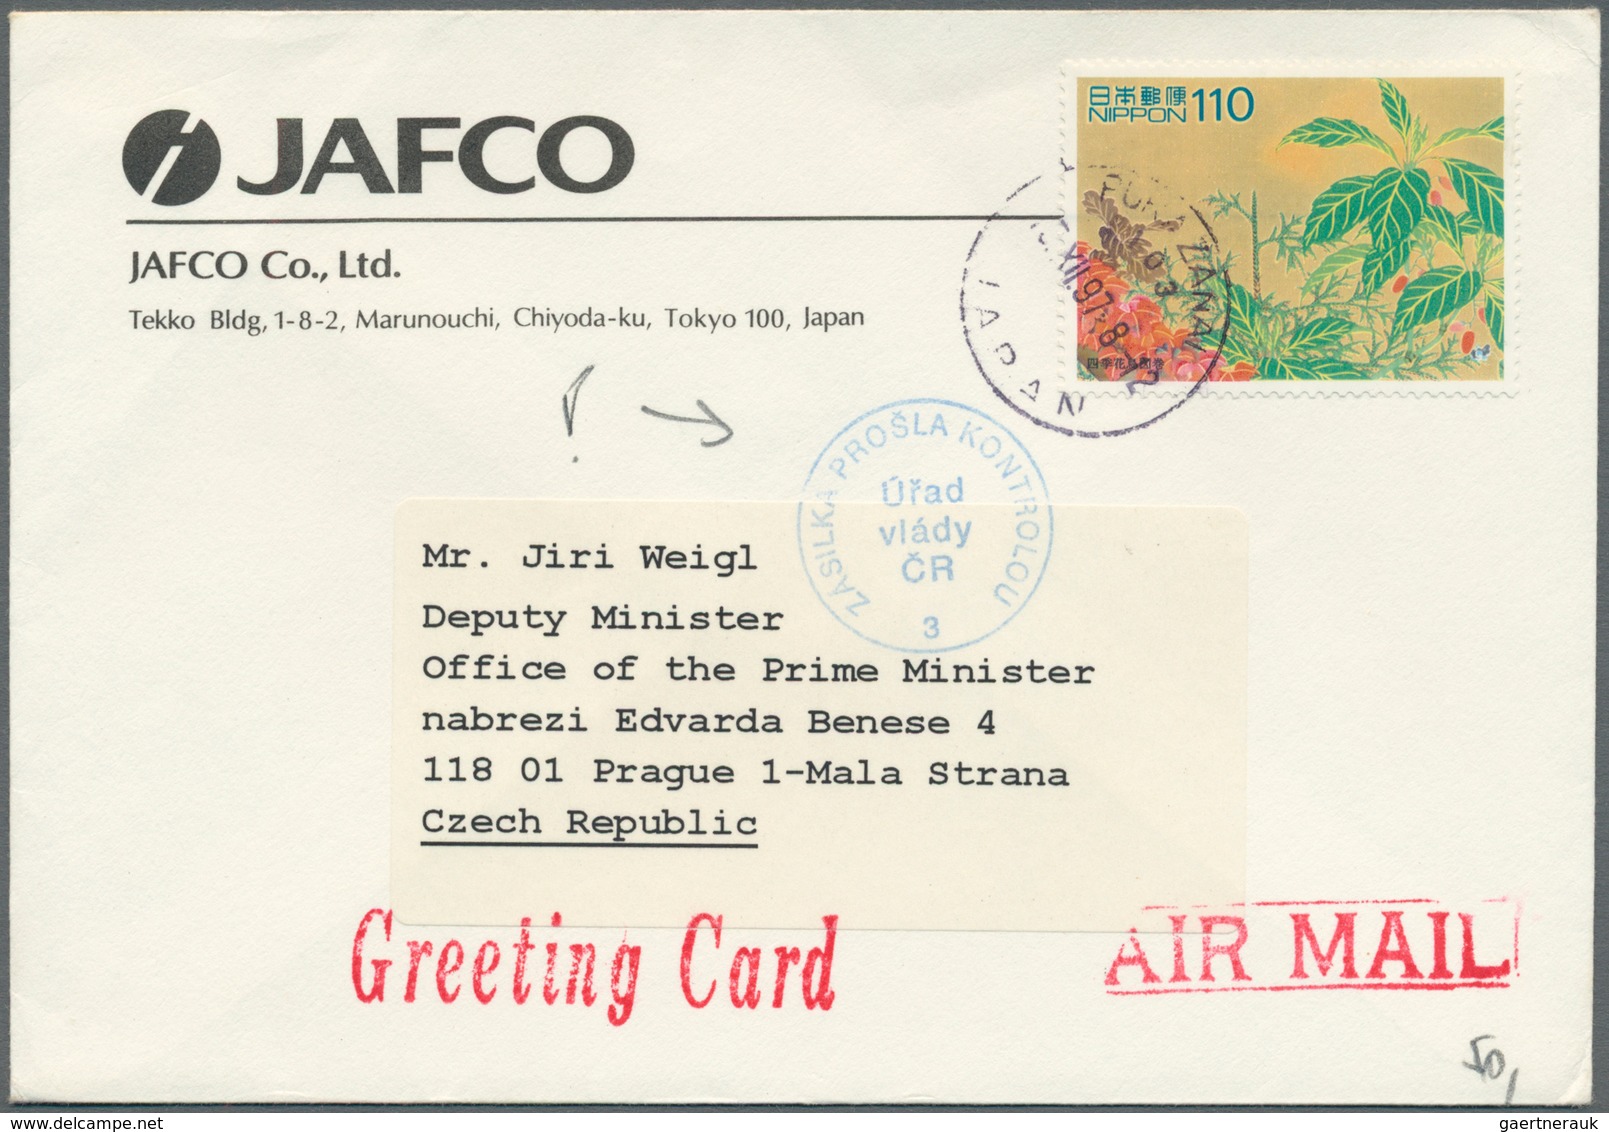 22921 Japan: 1950/90 (ca.), about 200 covers/used ppc/few used stationery, all gone to abroad, inc. regist